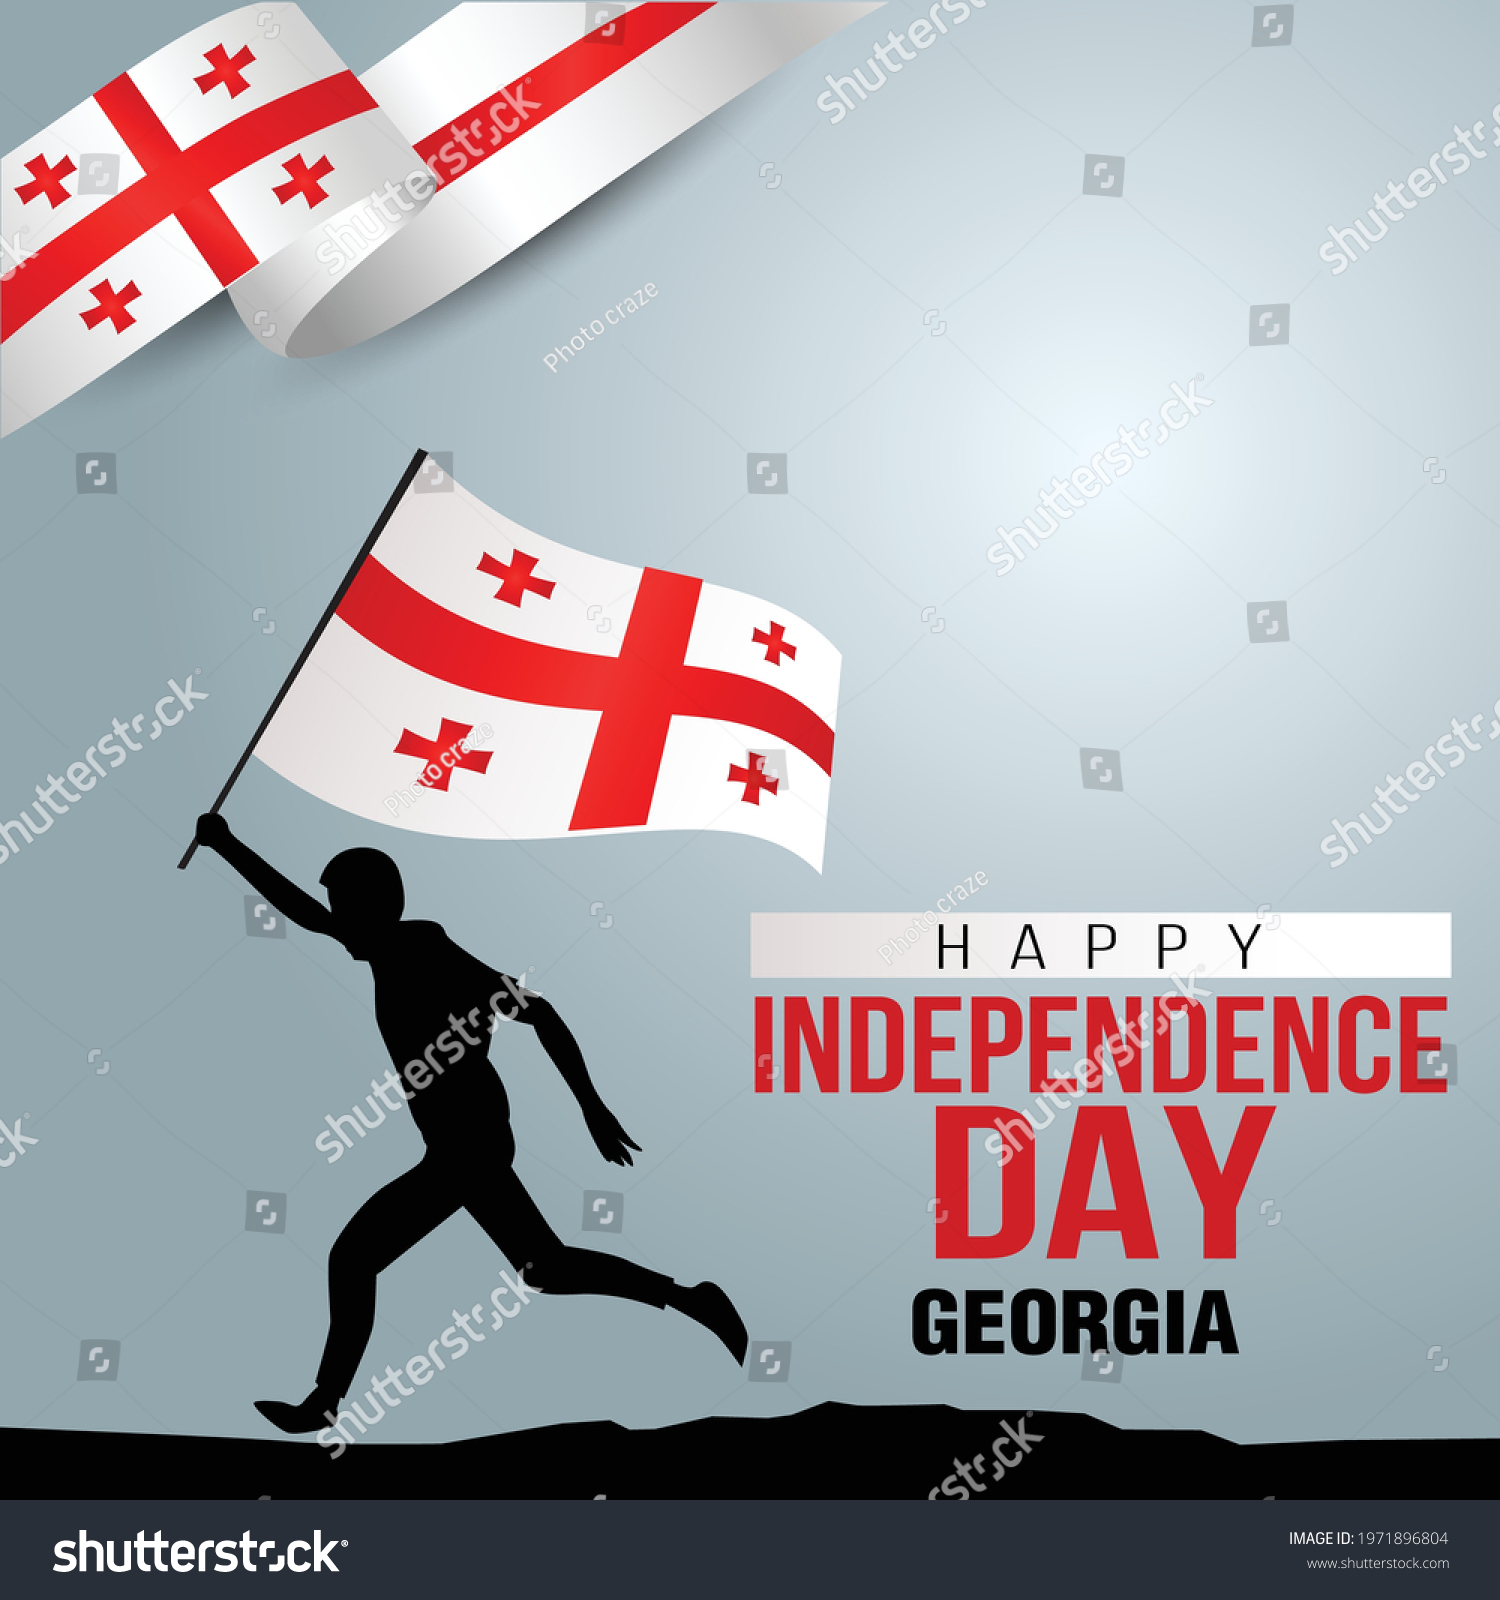 SVG of Happy Independence Day Georgia Vector Template Design Illustration. silhouette man running with flag svg